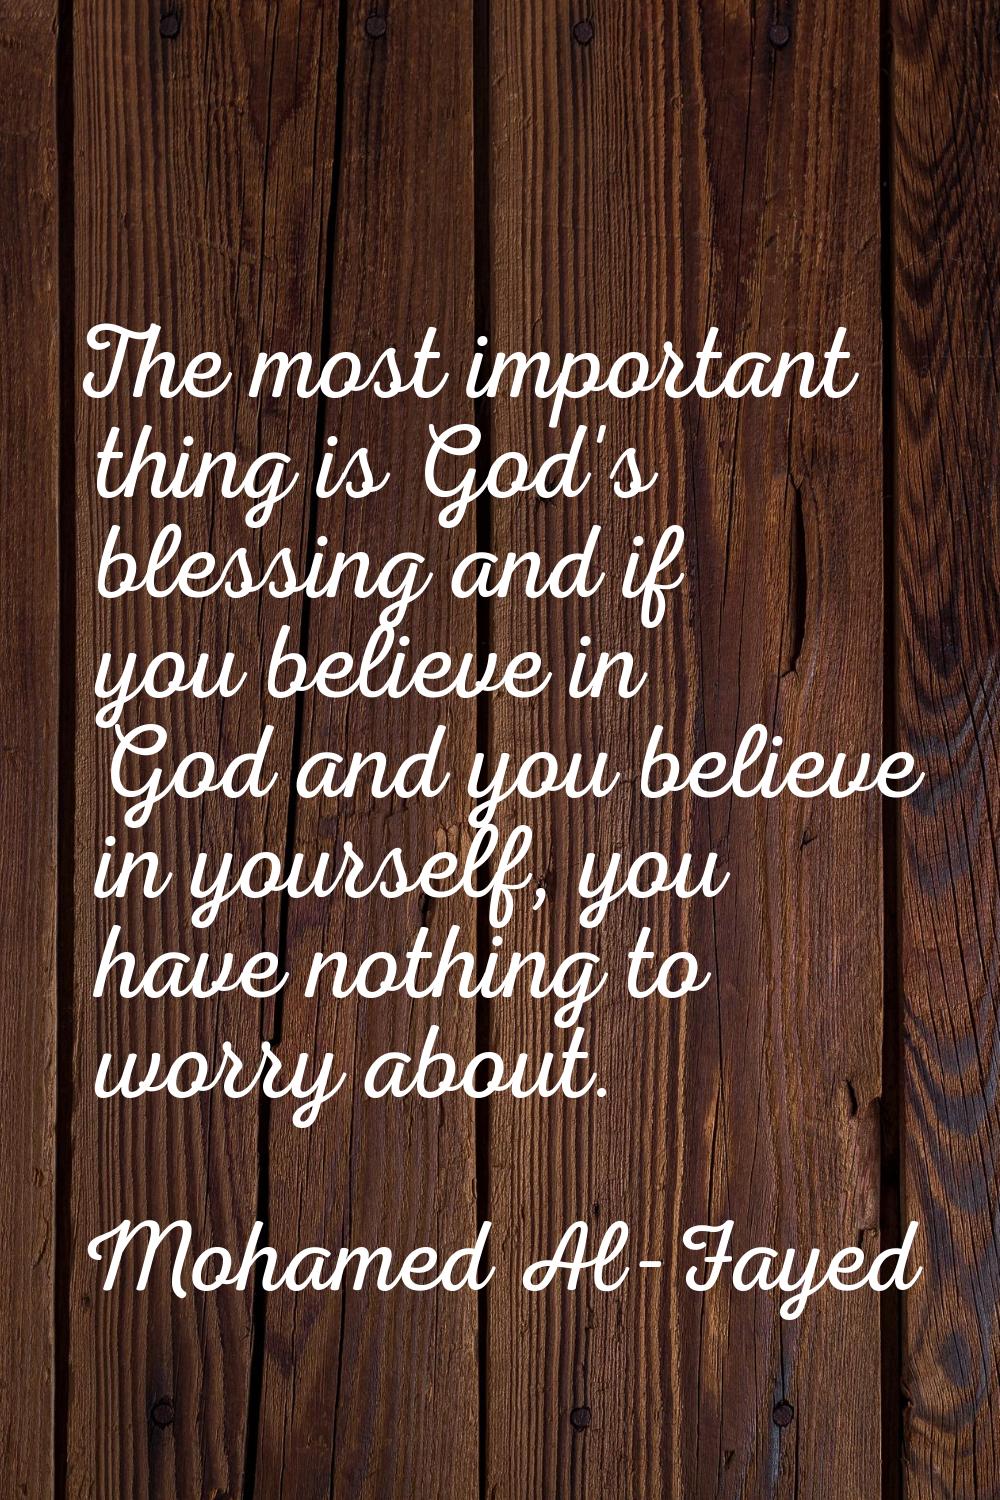 The most important thing is God's blessing and if you believe in God and you believe in yourself, y